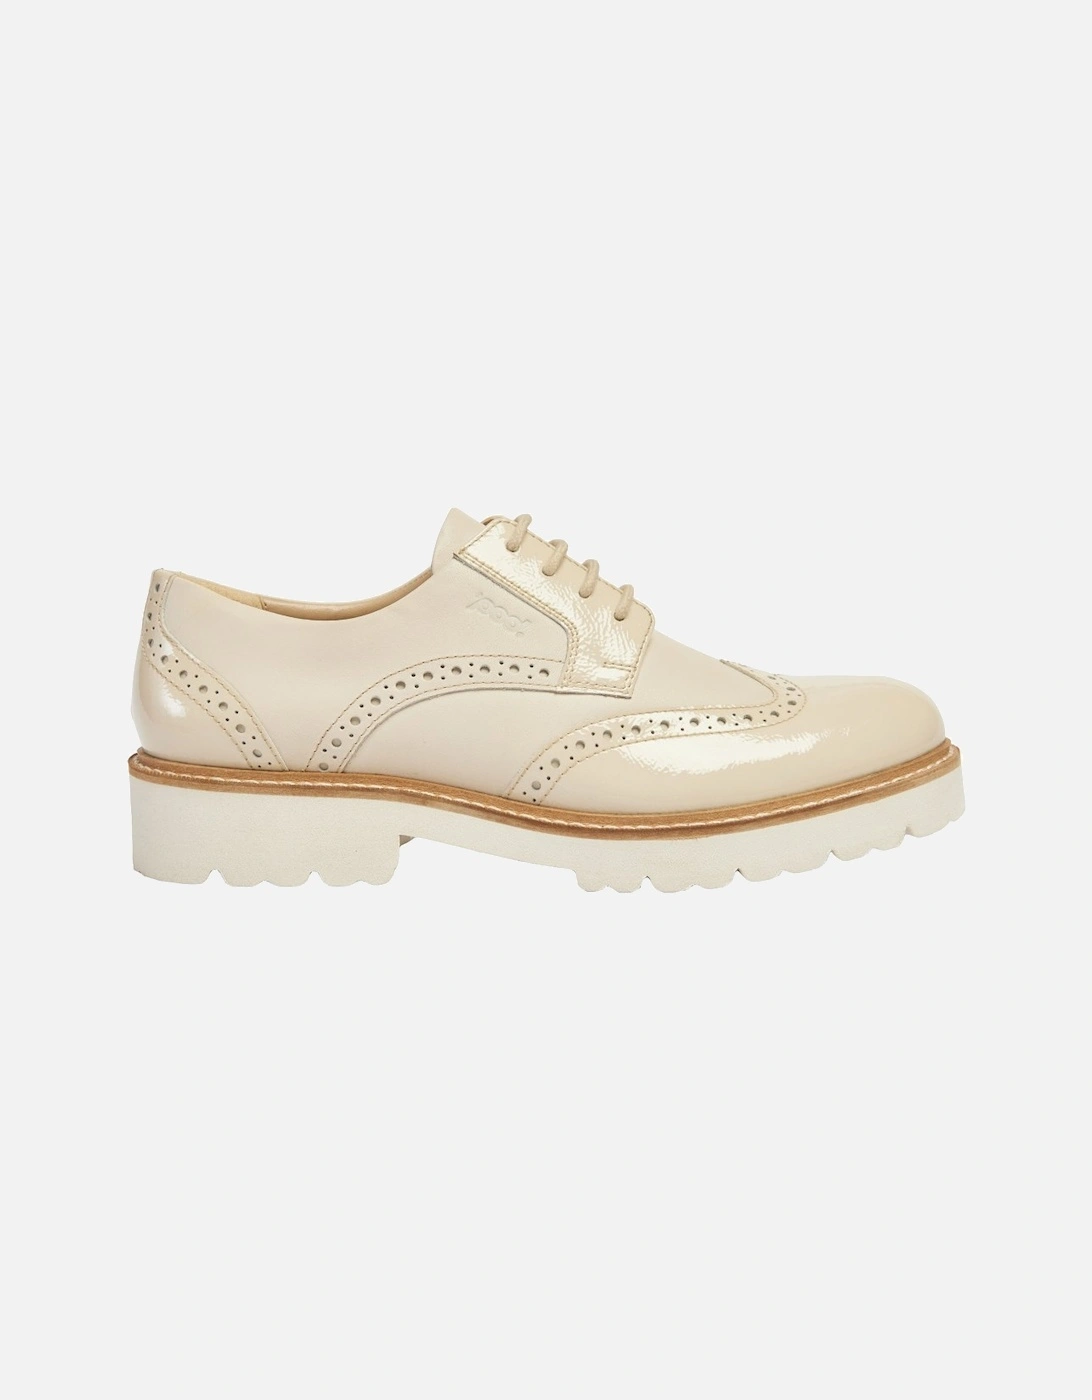 Kortney Womens Lace Up Brogues, 6 of 5